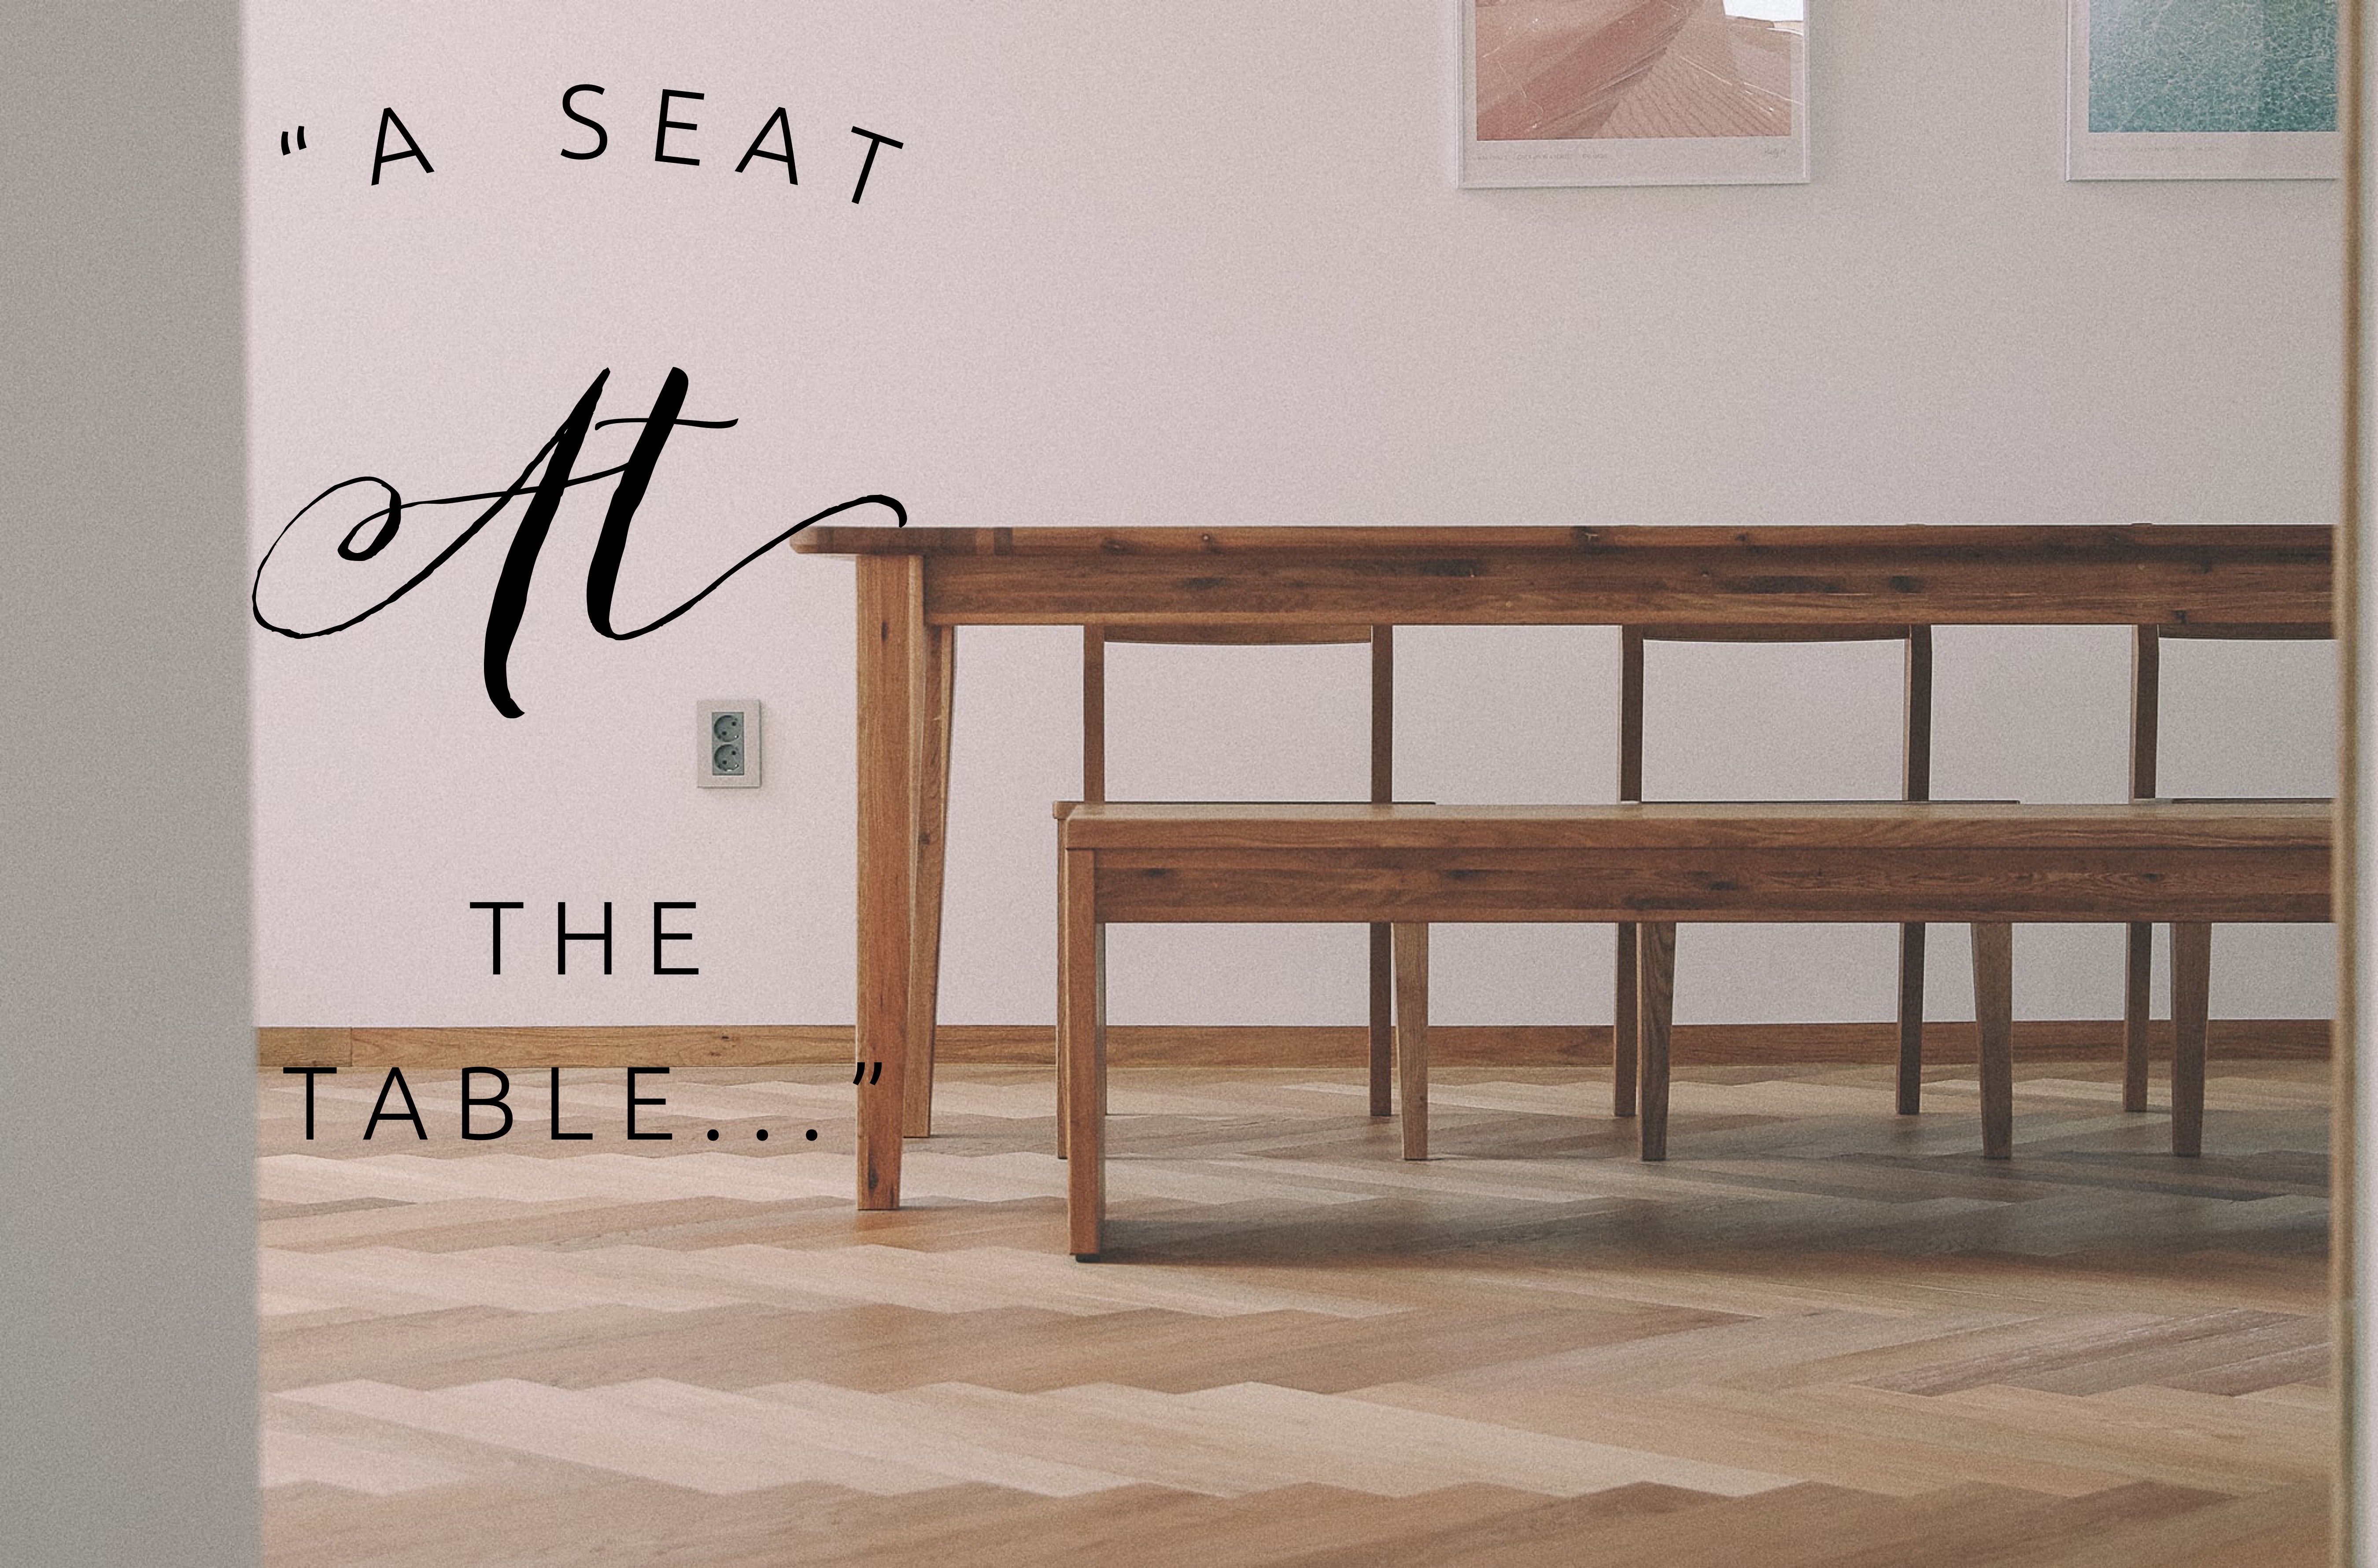 A Seat at my table…